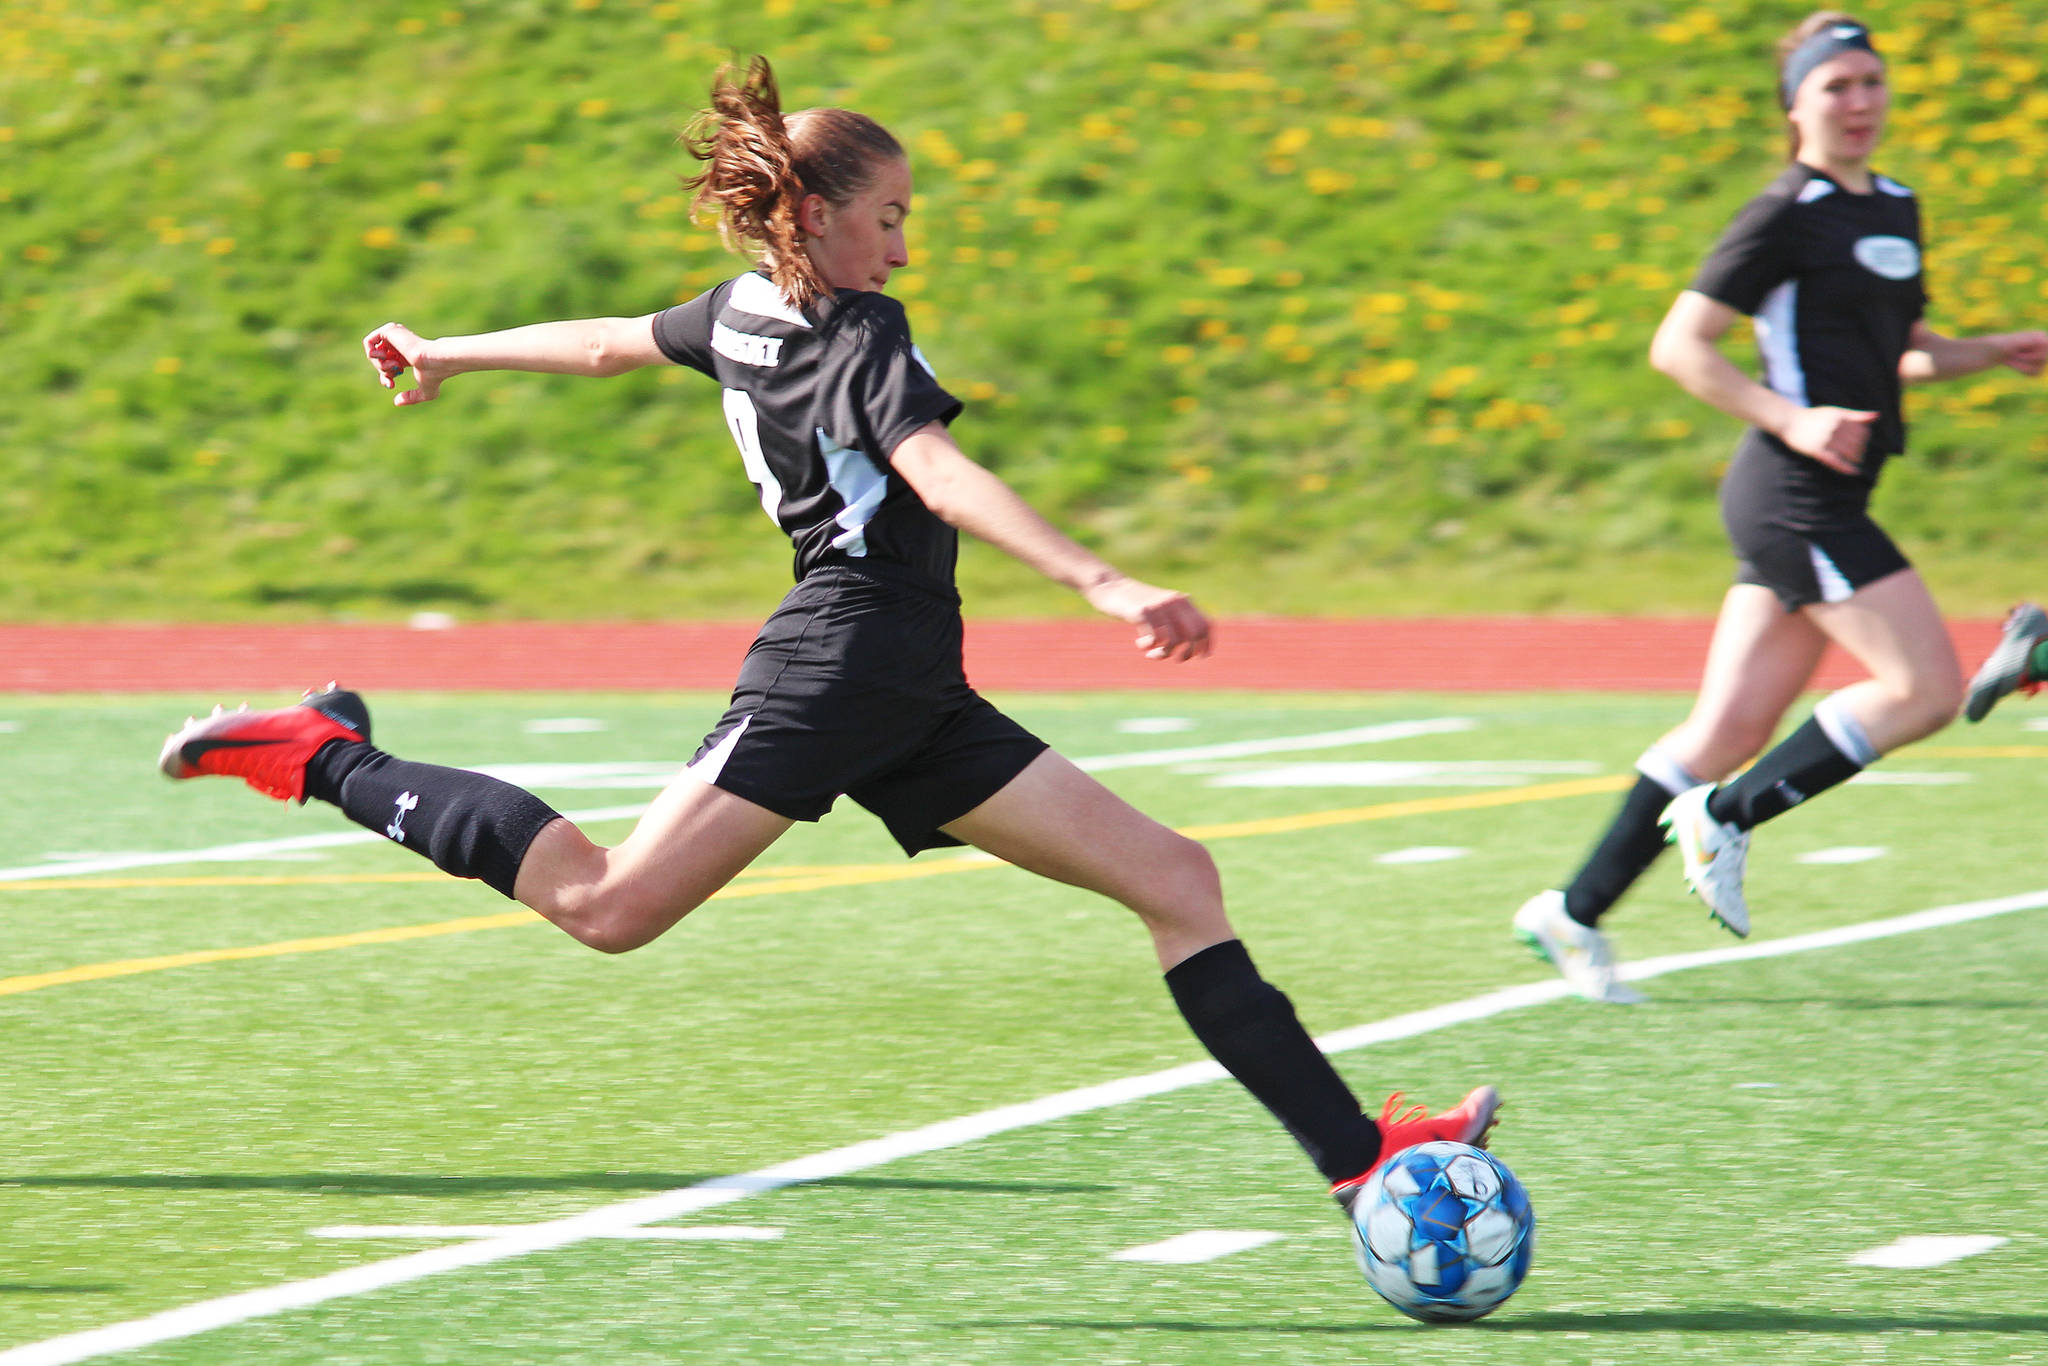 Nikiski’s Rylee Ellis sends the ball up the field during the first girls game of the Peninsula Conference Soccer Tournament on Thursday, May 16, 2019 at Homer High School in Homer, Alaska. (Photo by Megan Pacer/Homer News)